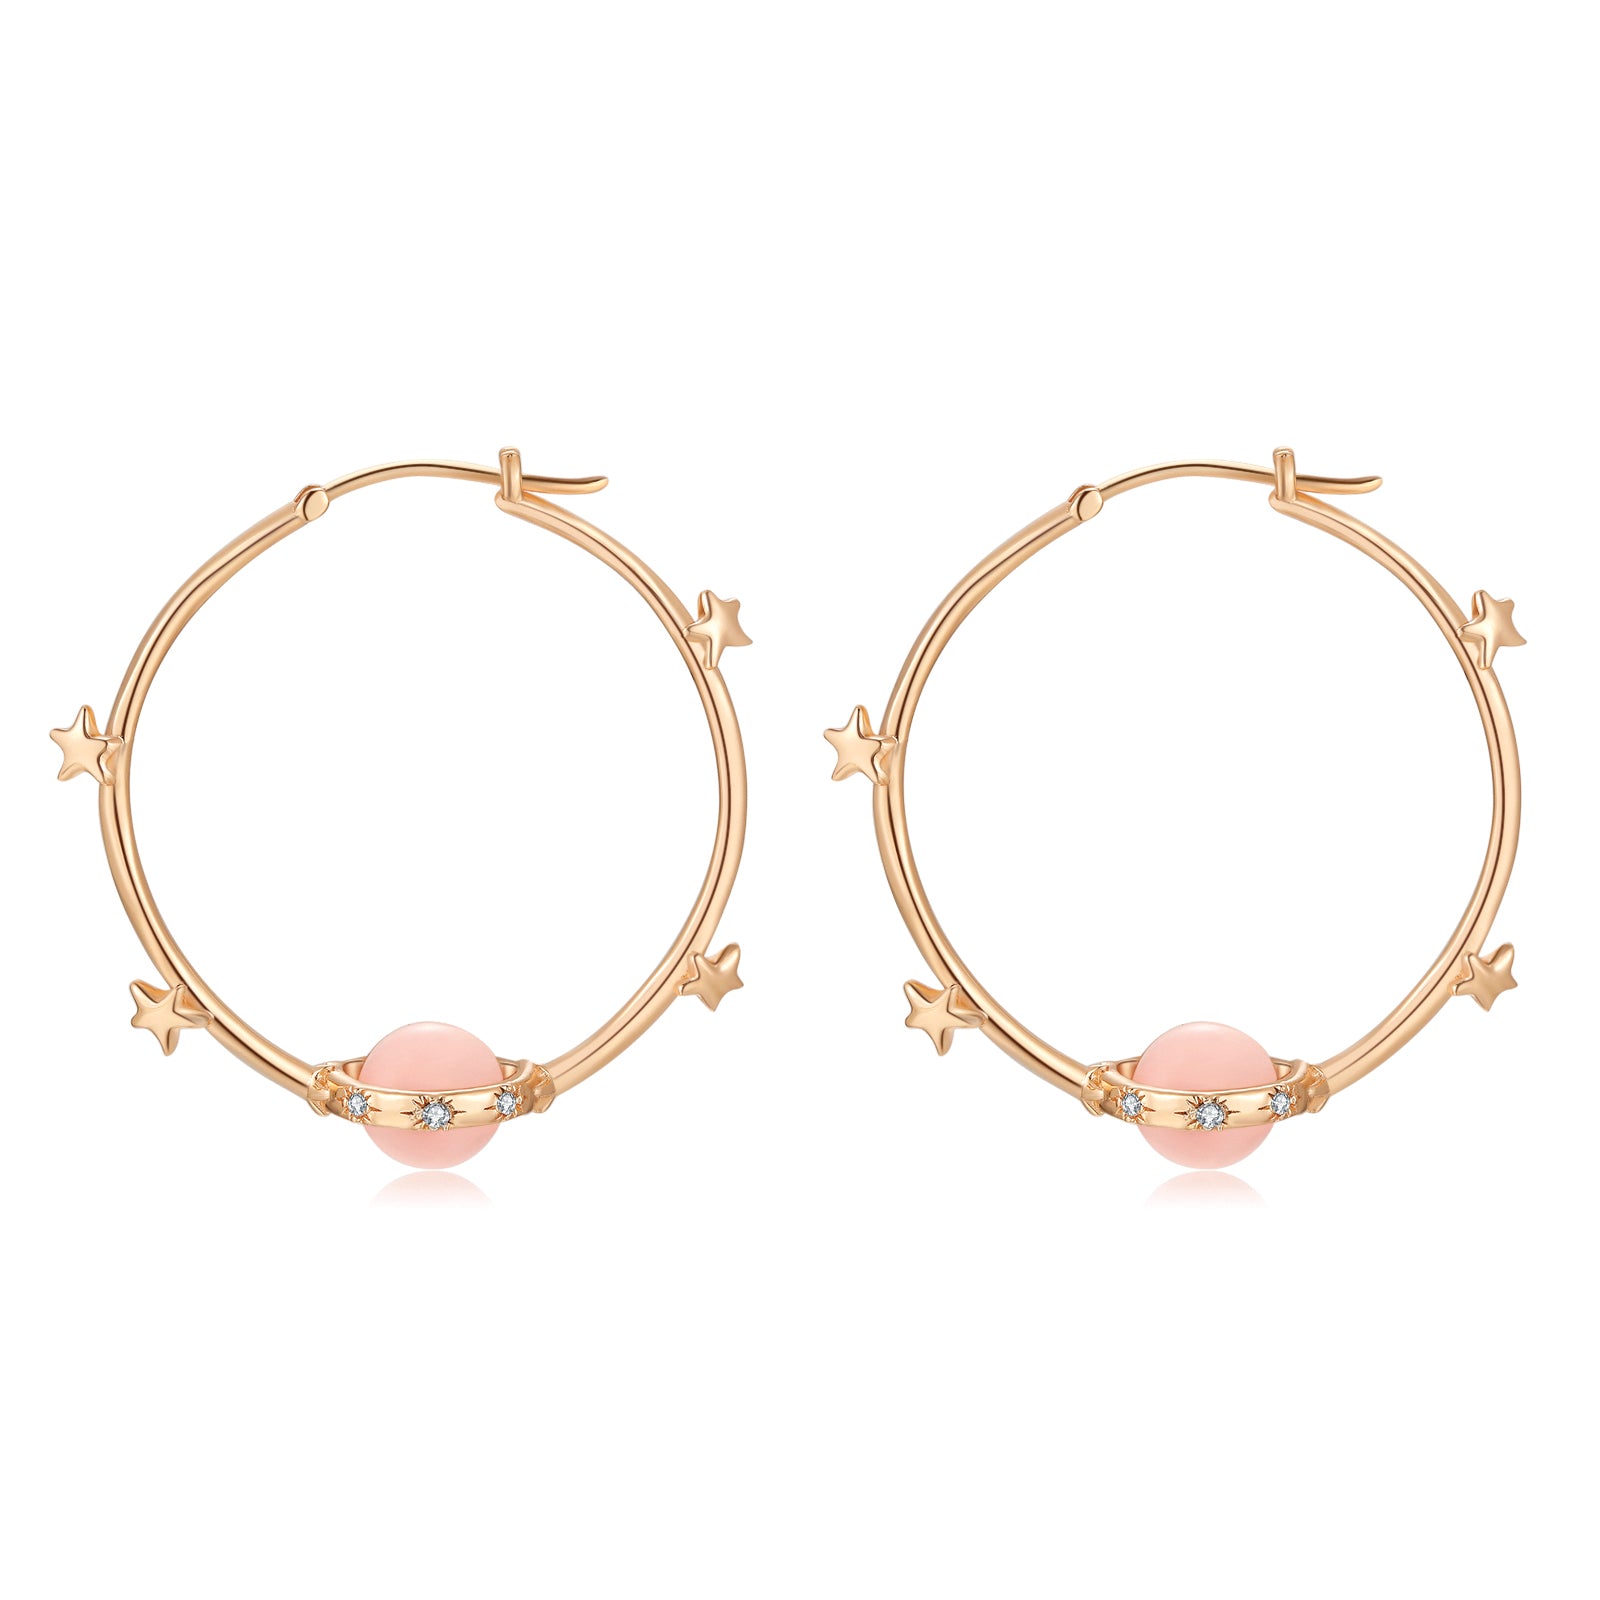 Pink Opal Gold Hoop Earrings - Anahata | LOVE BY THE MOON